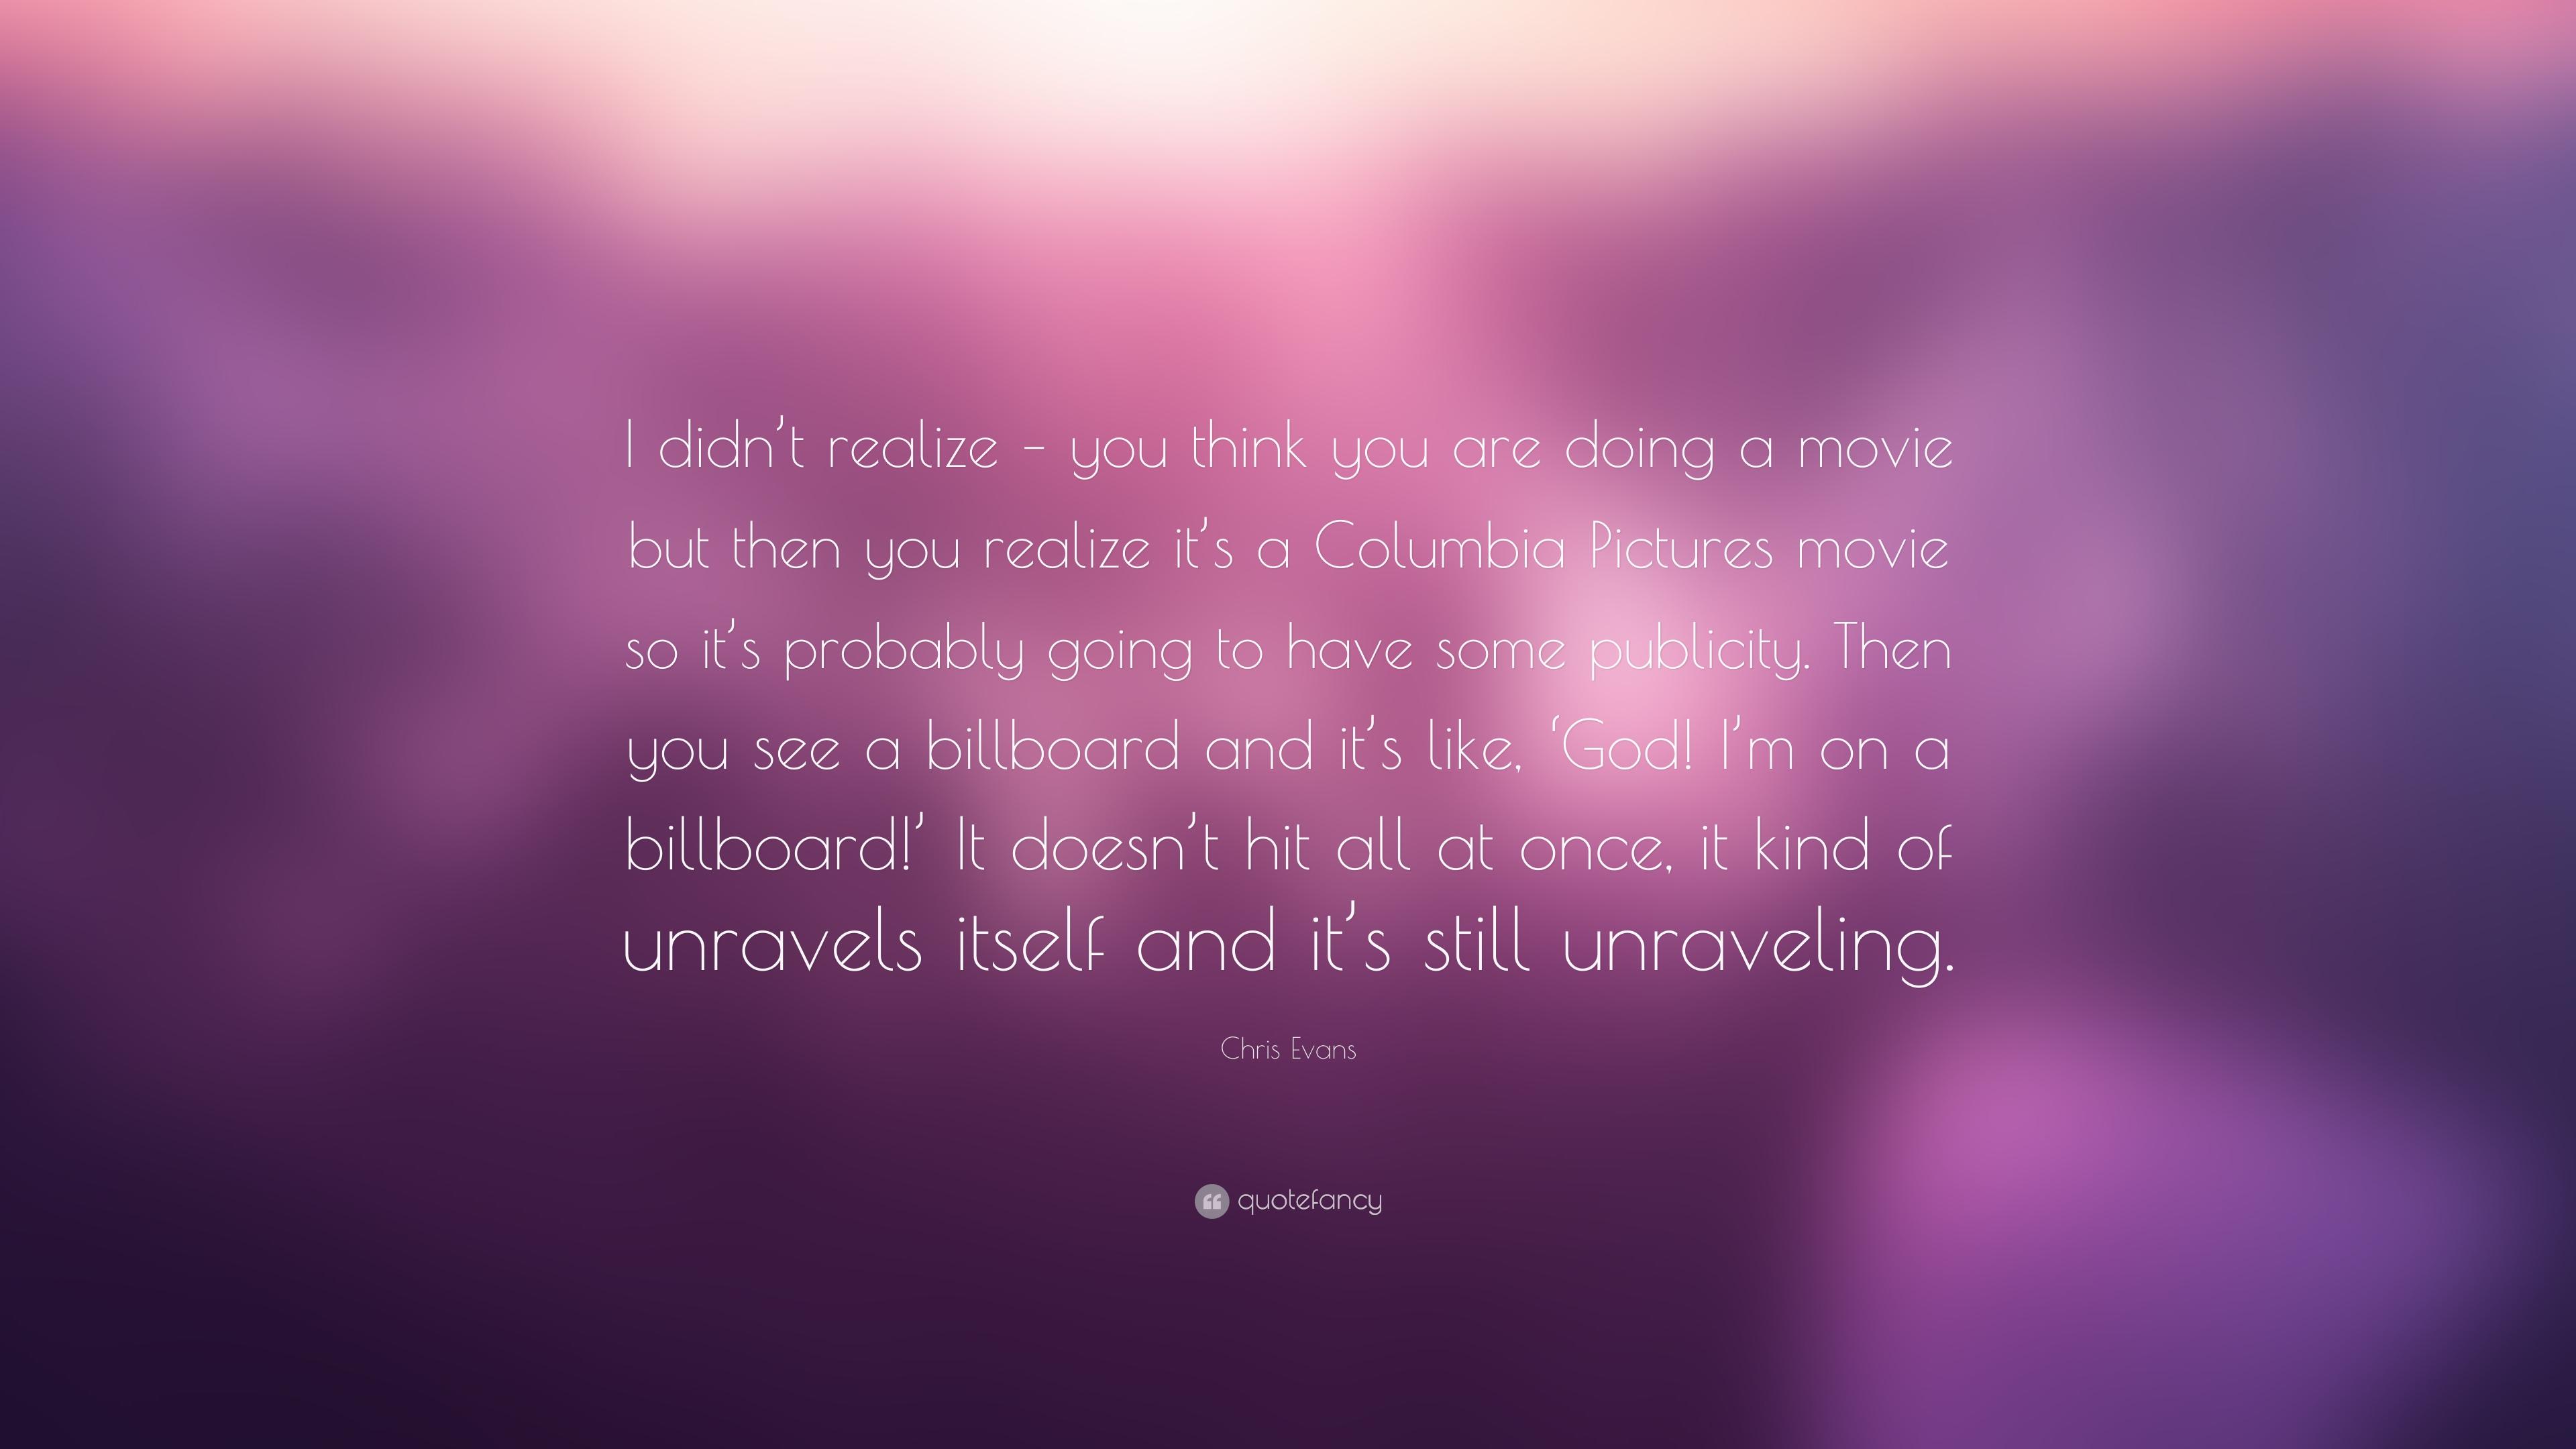 Chris Evans Quote: “I didn't realize